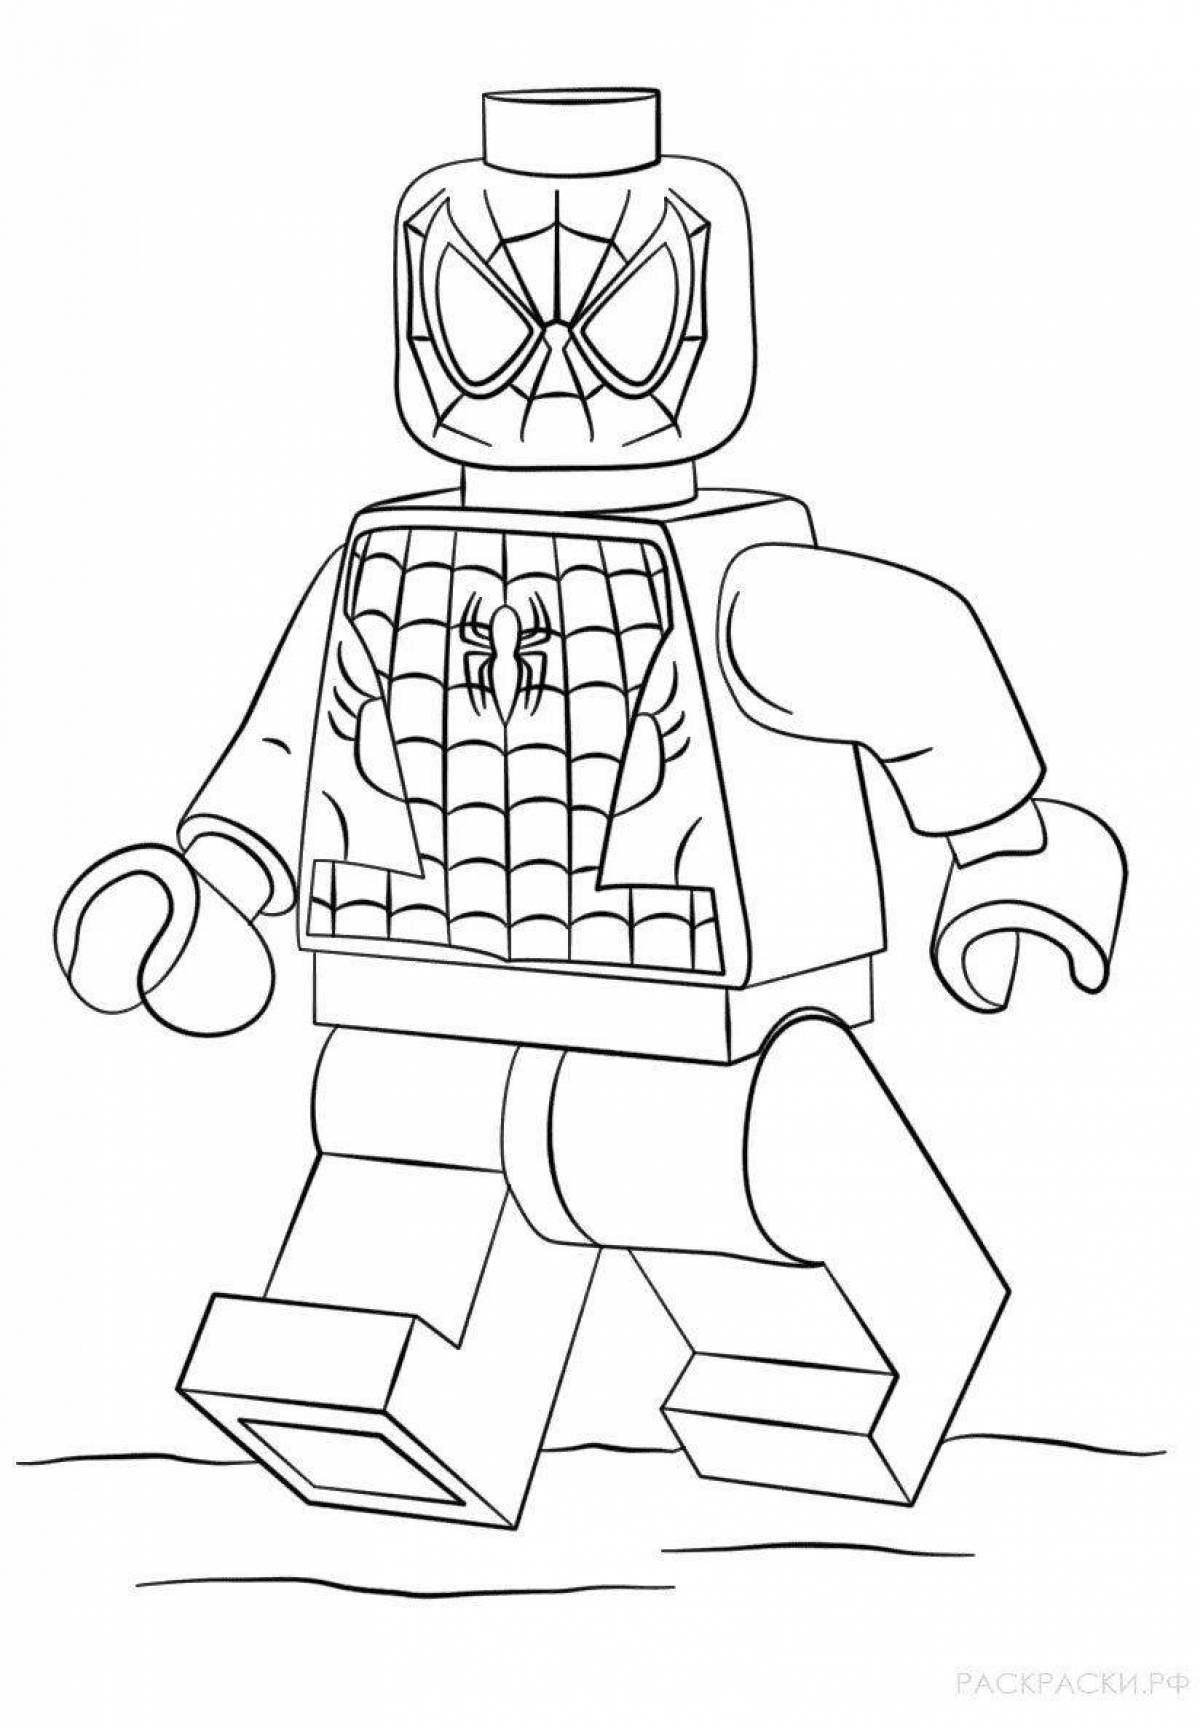 Great lego heroes coloring pages